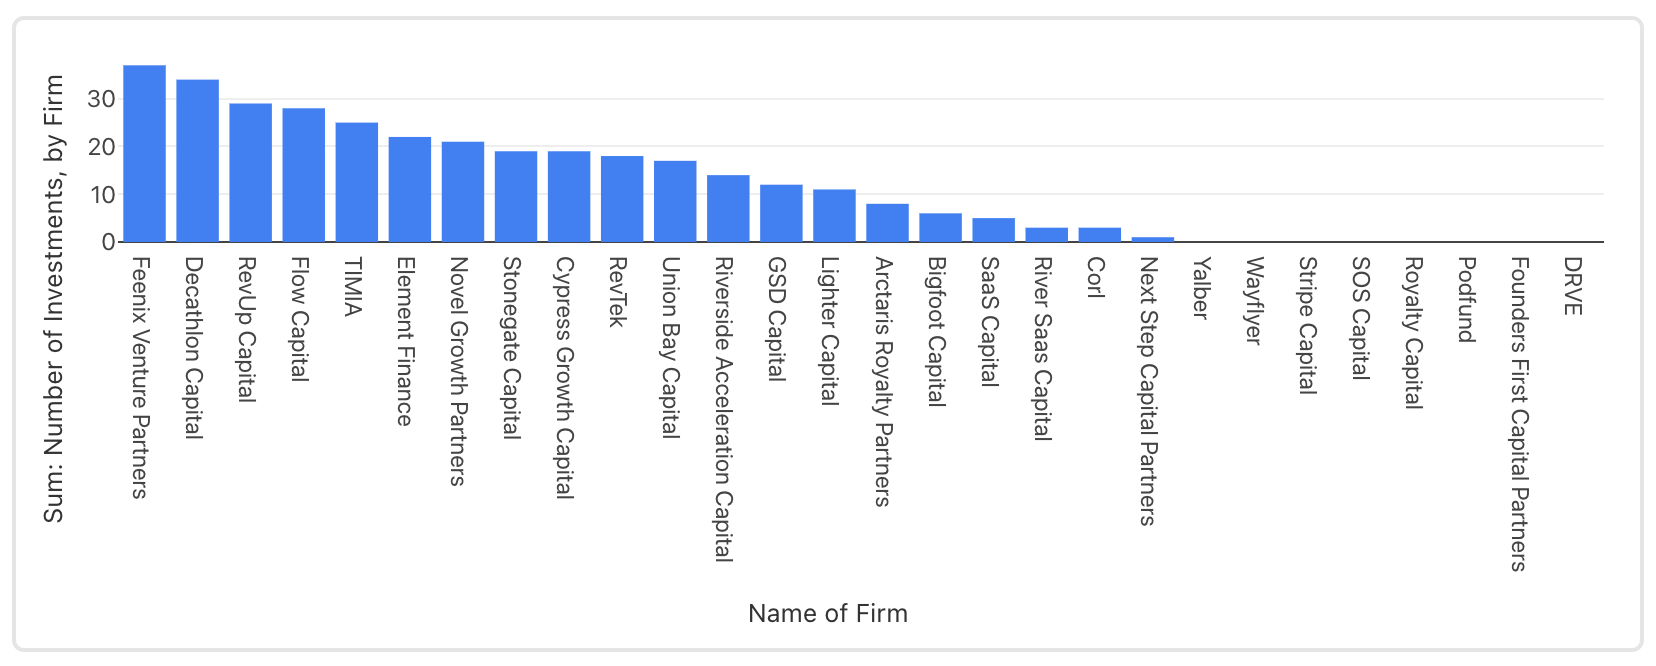 Number of Investments, by Firm